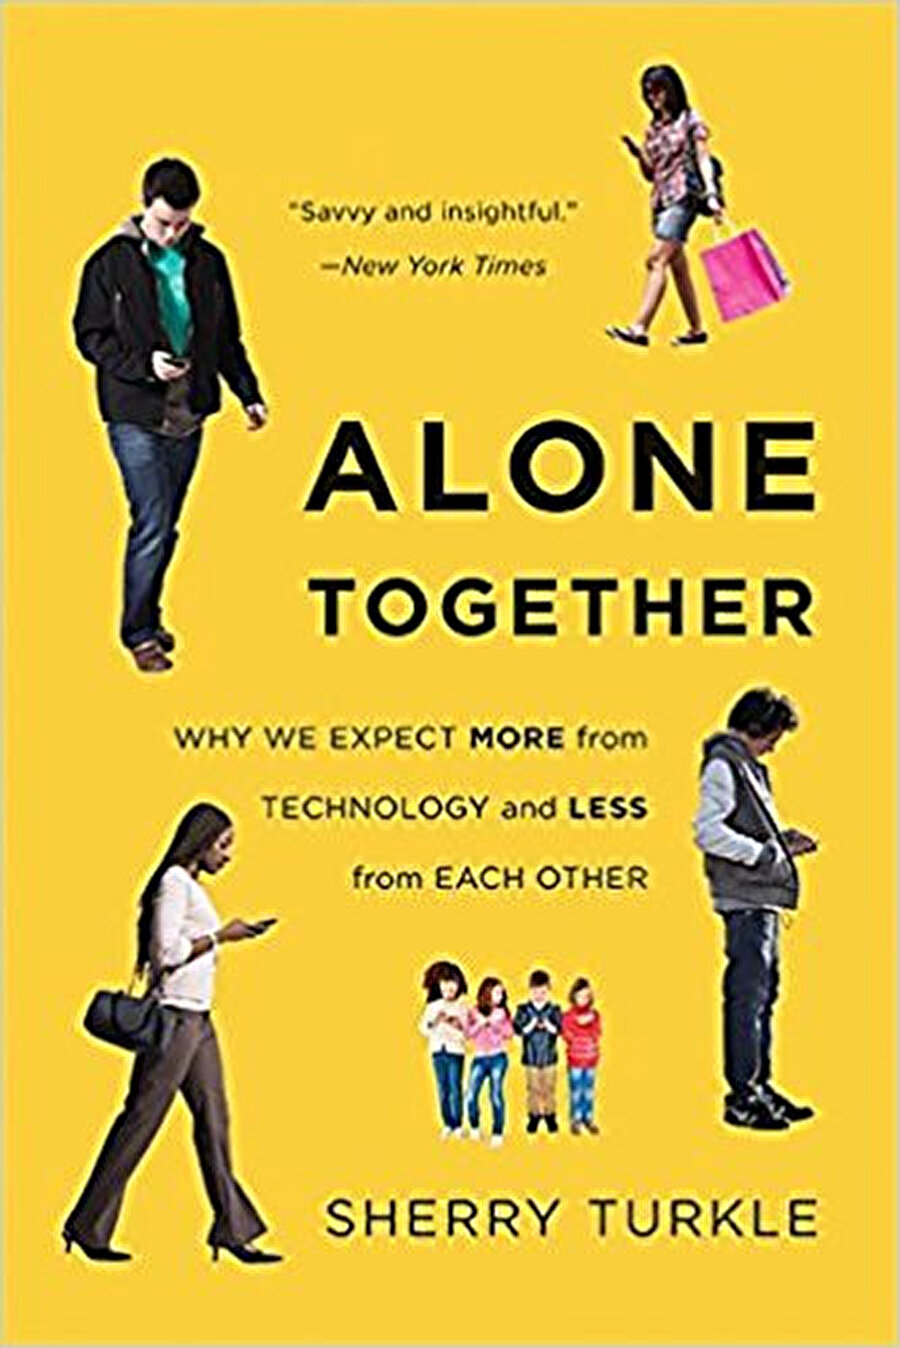 Birlikte Yalnız, Sherry Turkle, Alone Together: Why We Expect More From Technology and Less from Each Other, Basic Books, 2012, 360 s. 